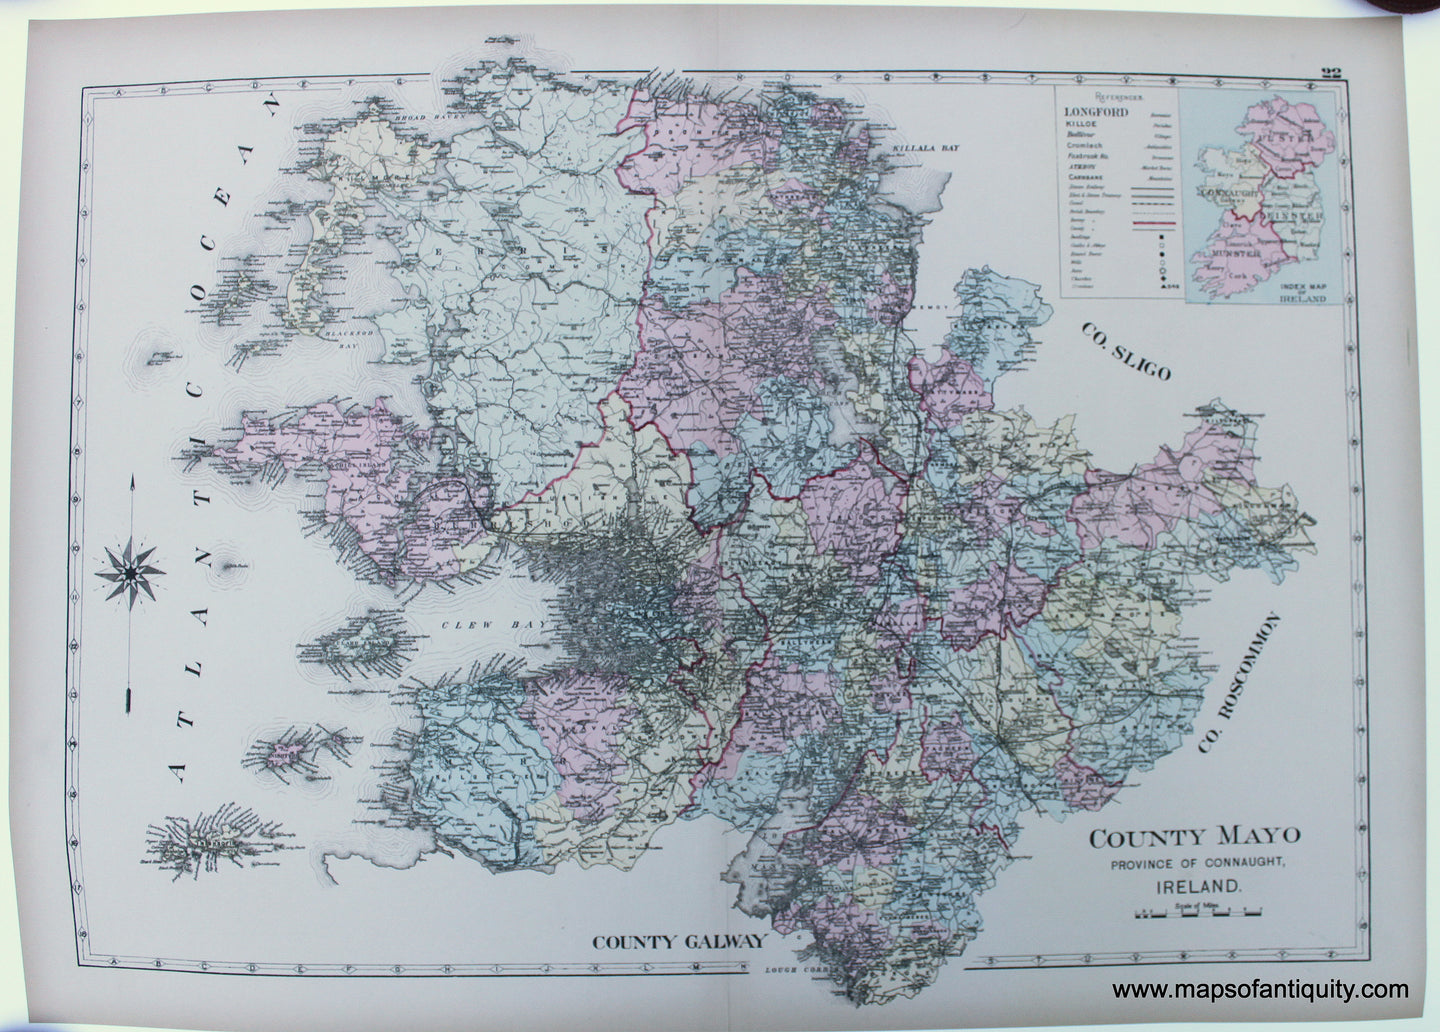 Reproductions-County-Mayo-Province-of-Connaught-Ireland-Reproduction-Richards-Europe-1800s-19th-century-Maps-of-Antiquity